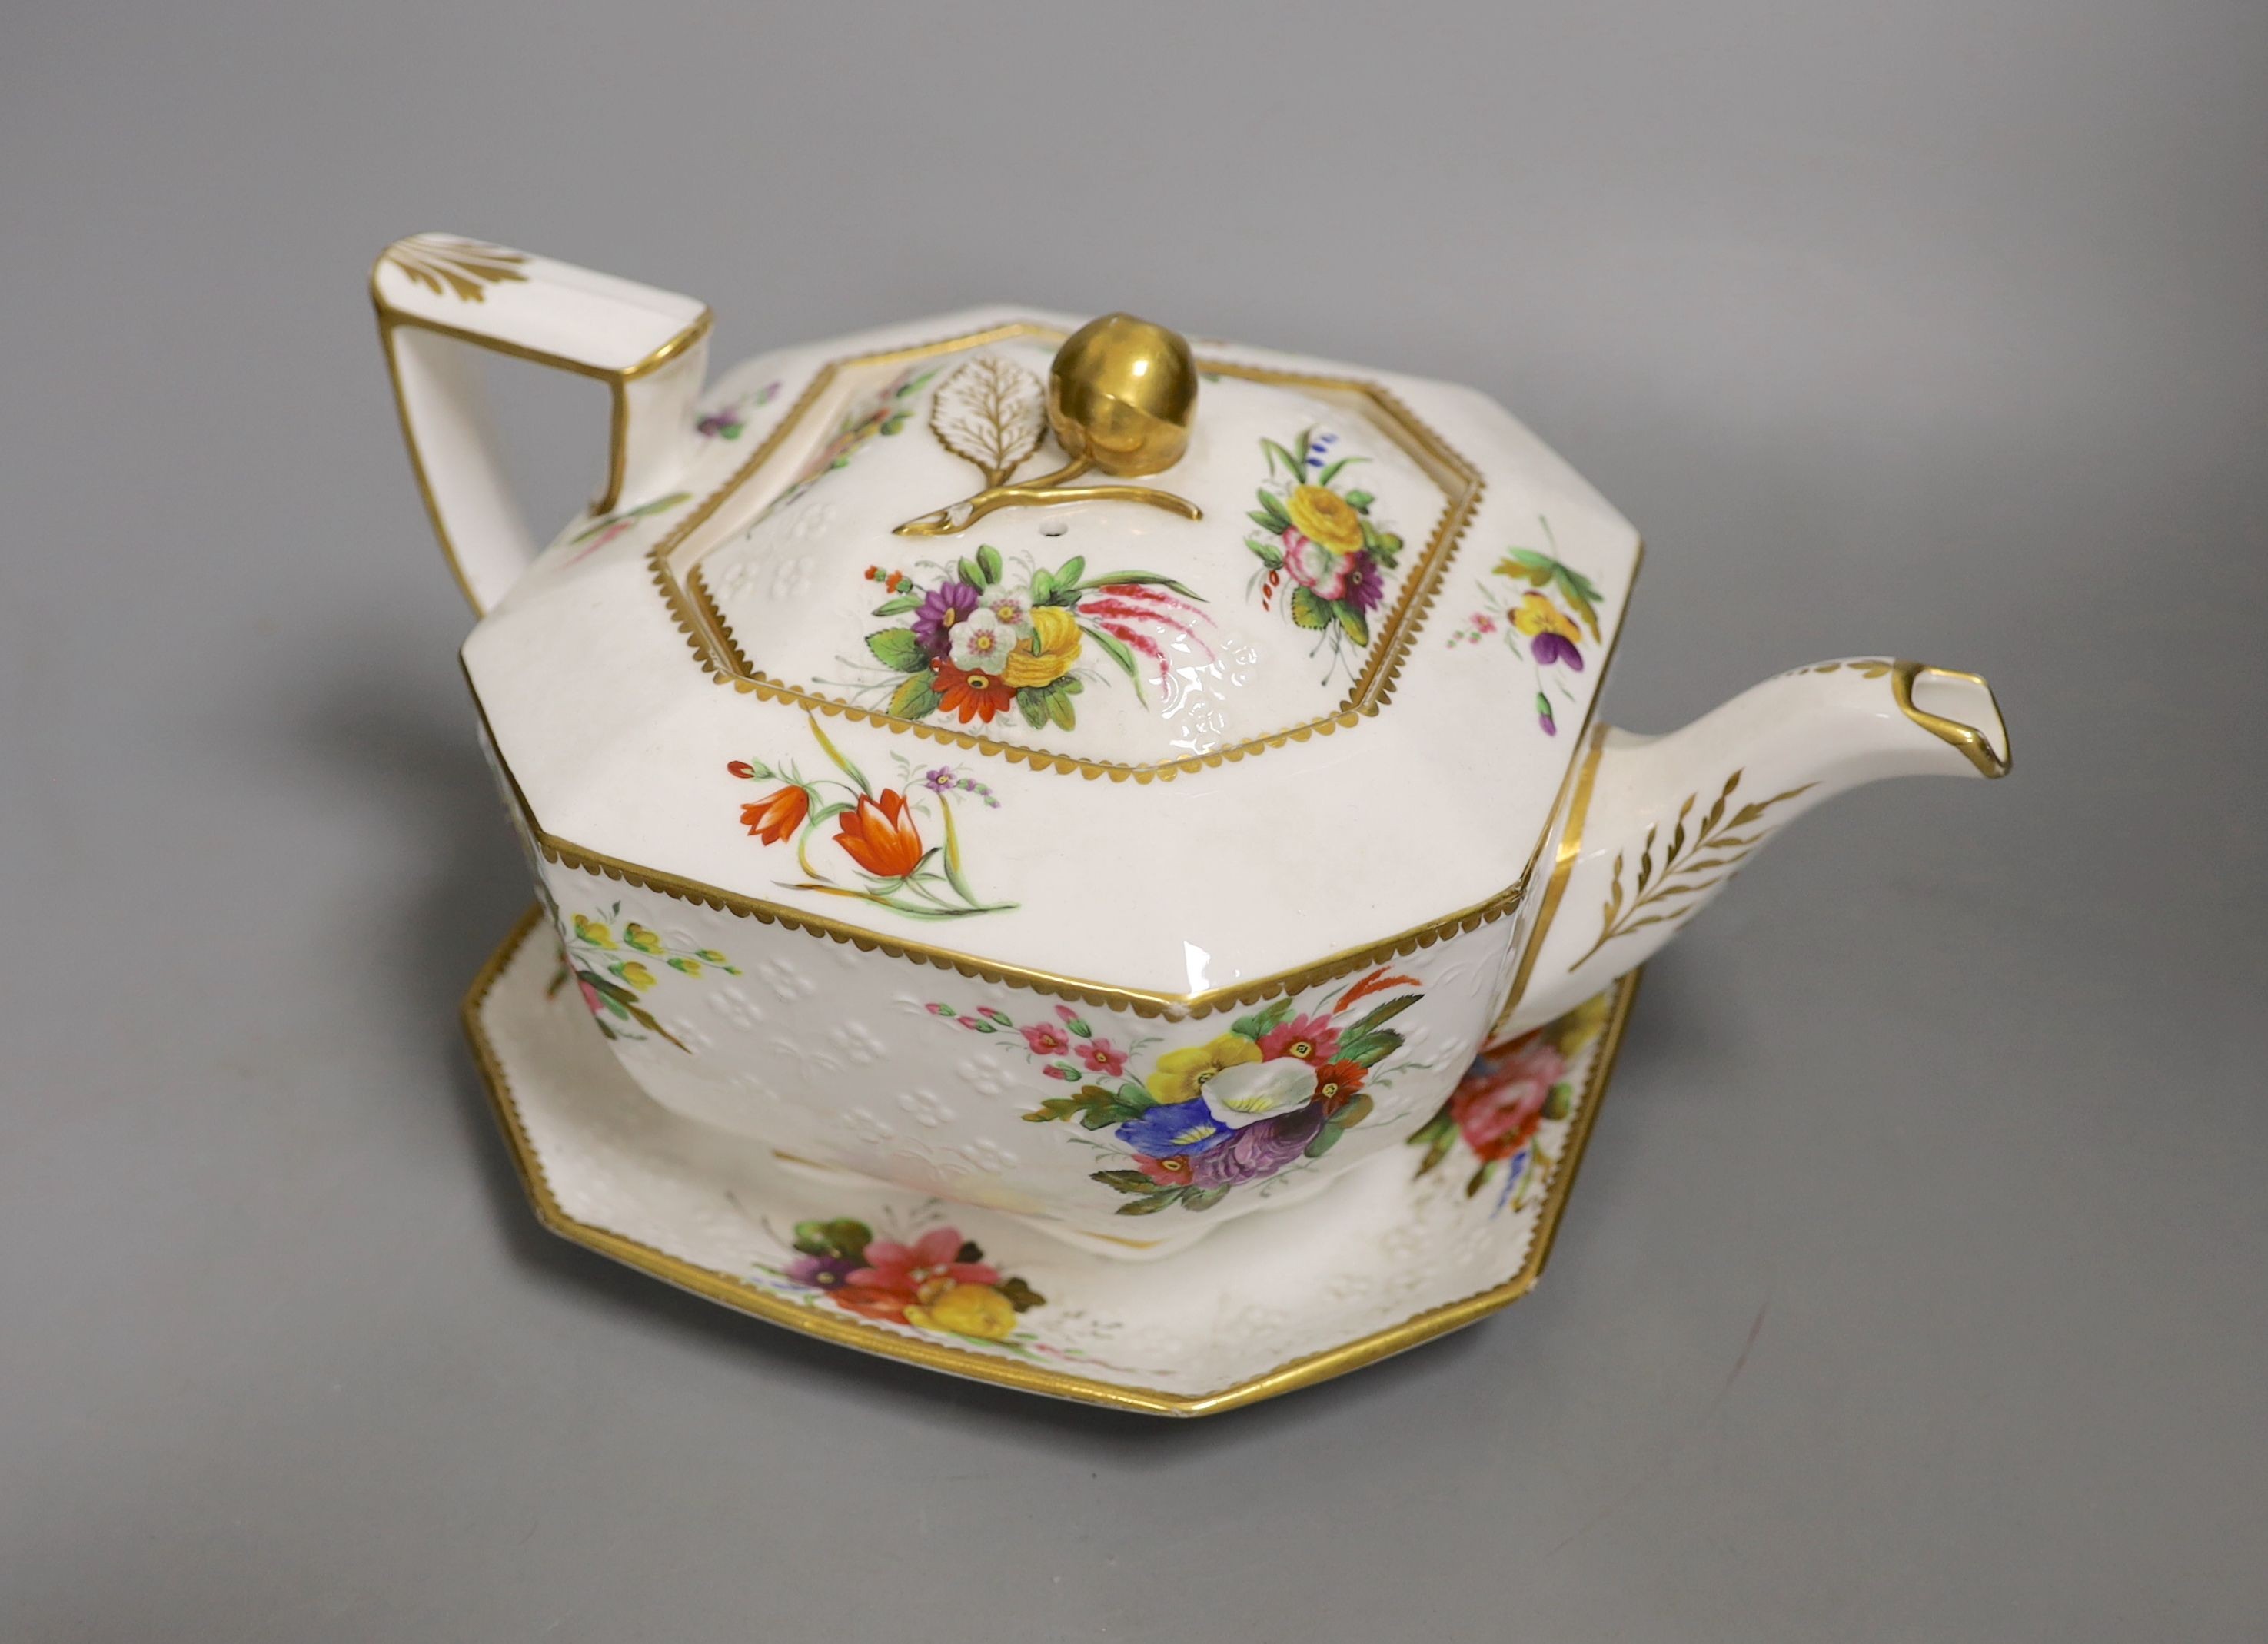 A Spode teapot cover and stand painted with flowers on a moulded body pattern 2527, c.1820, 24cm long